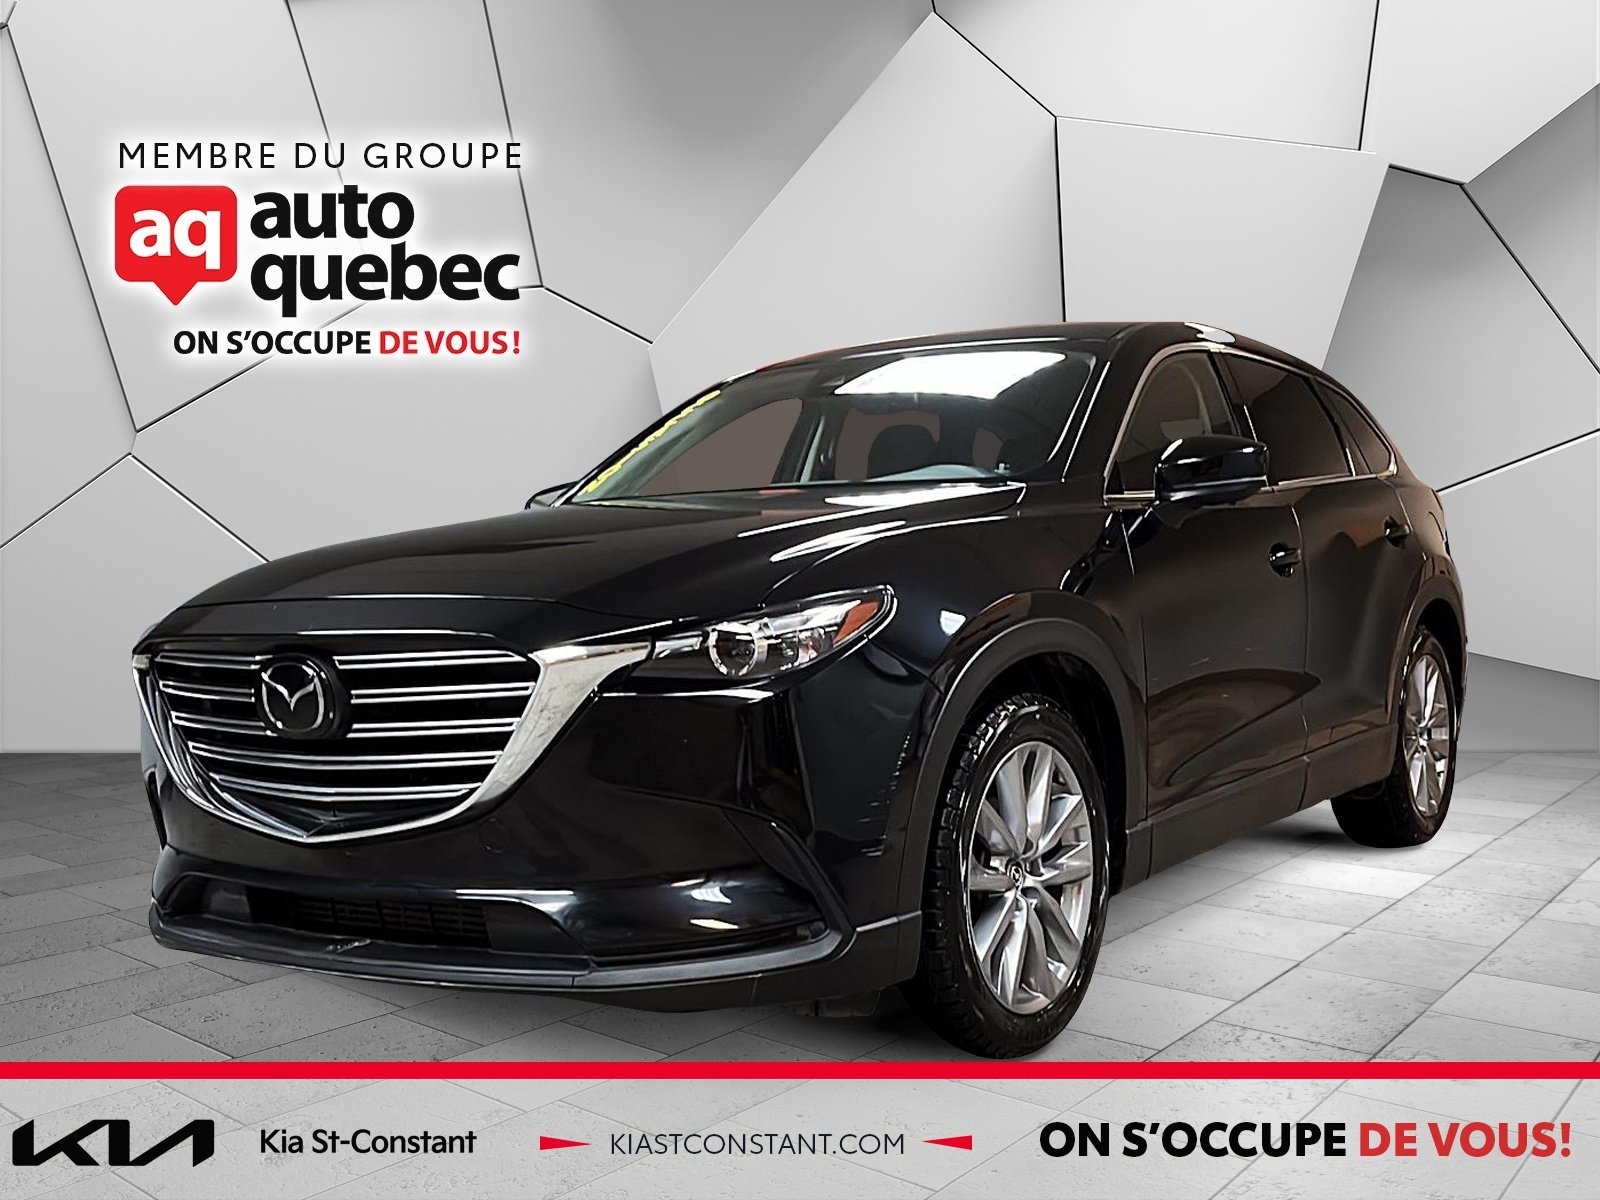 2021 Mazda CX-9 GS-L Awd 7 places Toit ouvrant Cuir Caméra Mags 